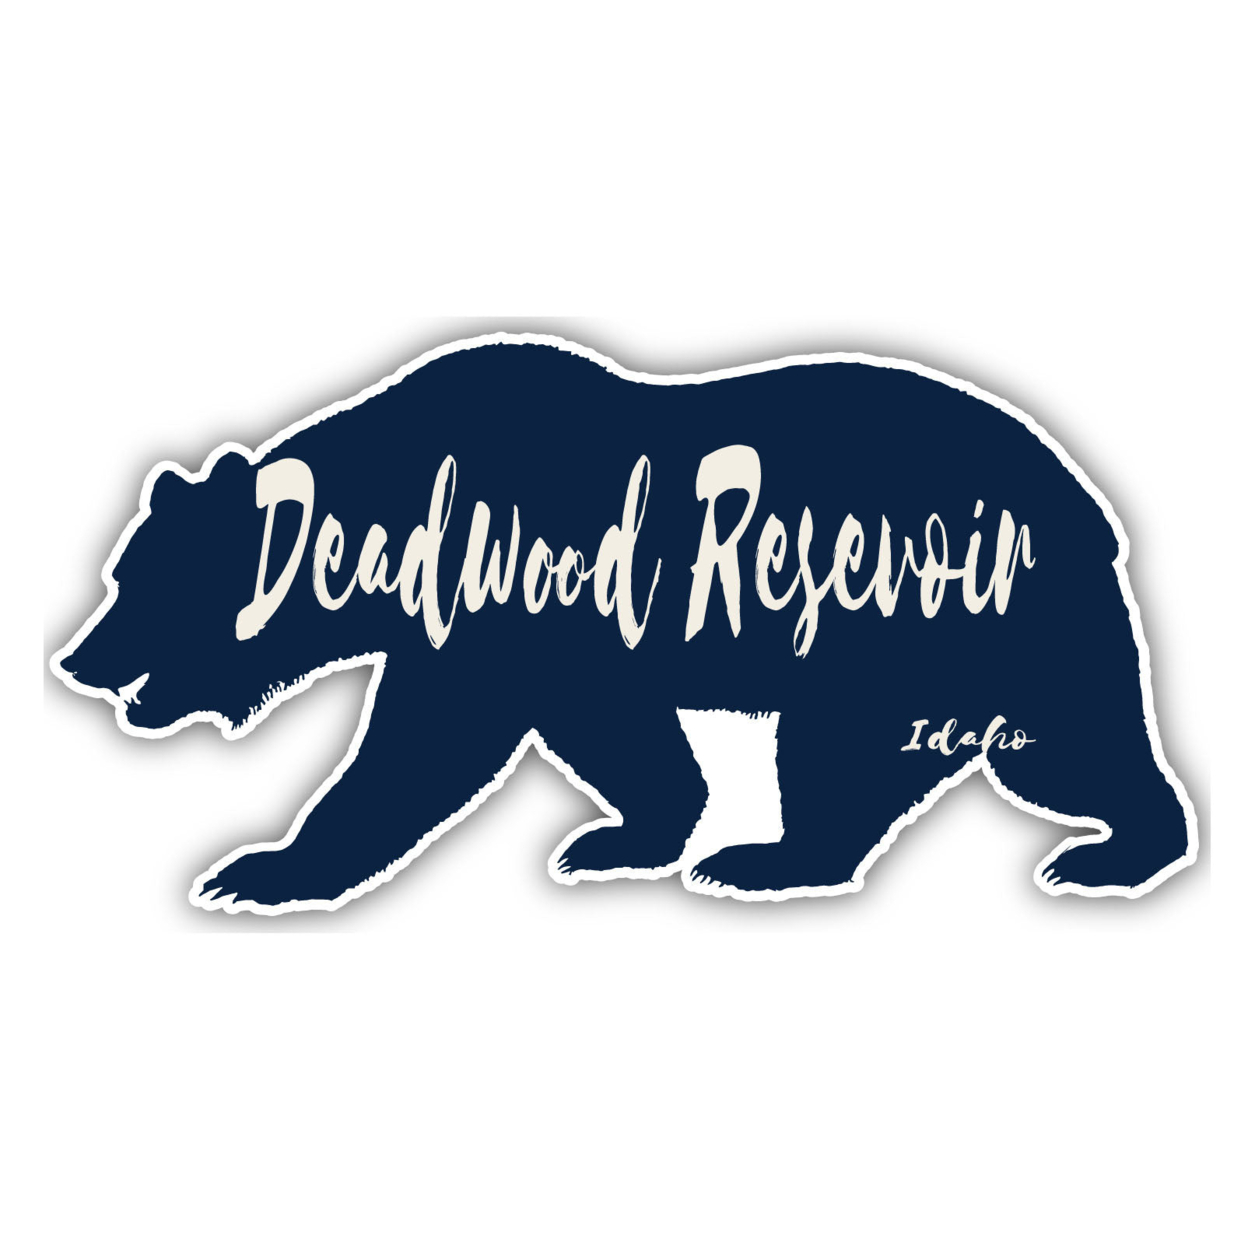 Deadwood Resevoir Idaho Souvenir Decorative Stickers (Choose Theme And Size) - 4-Pack, 10-Inch, Bear